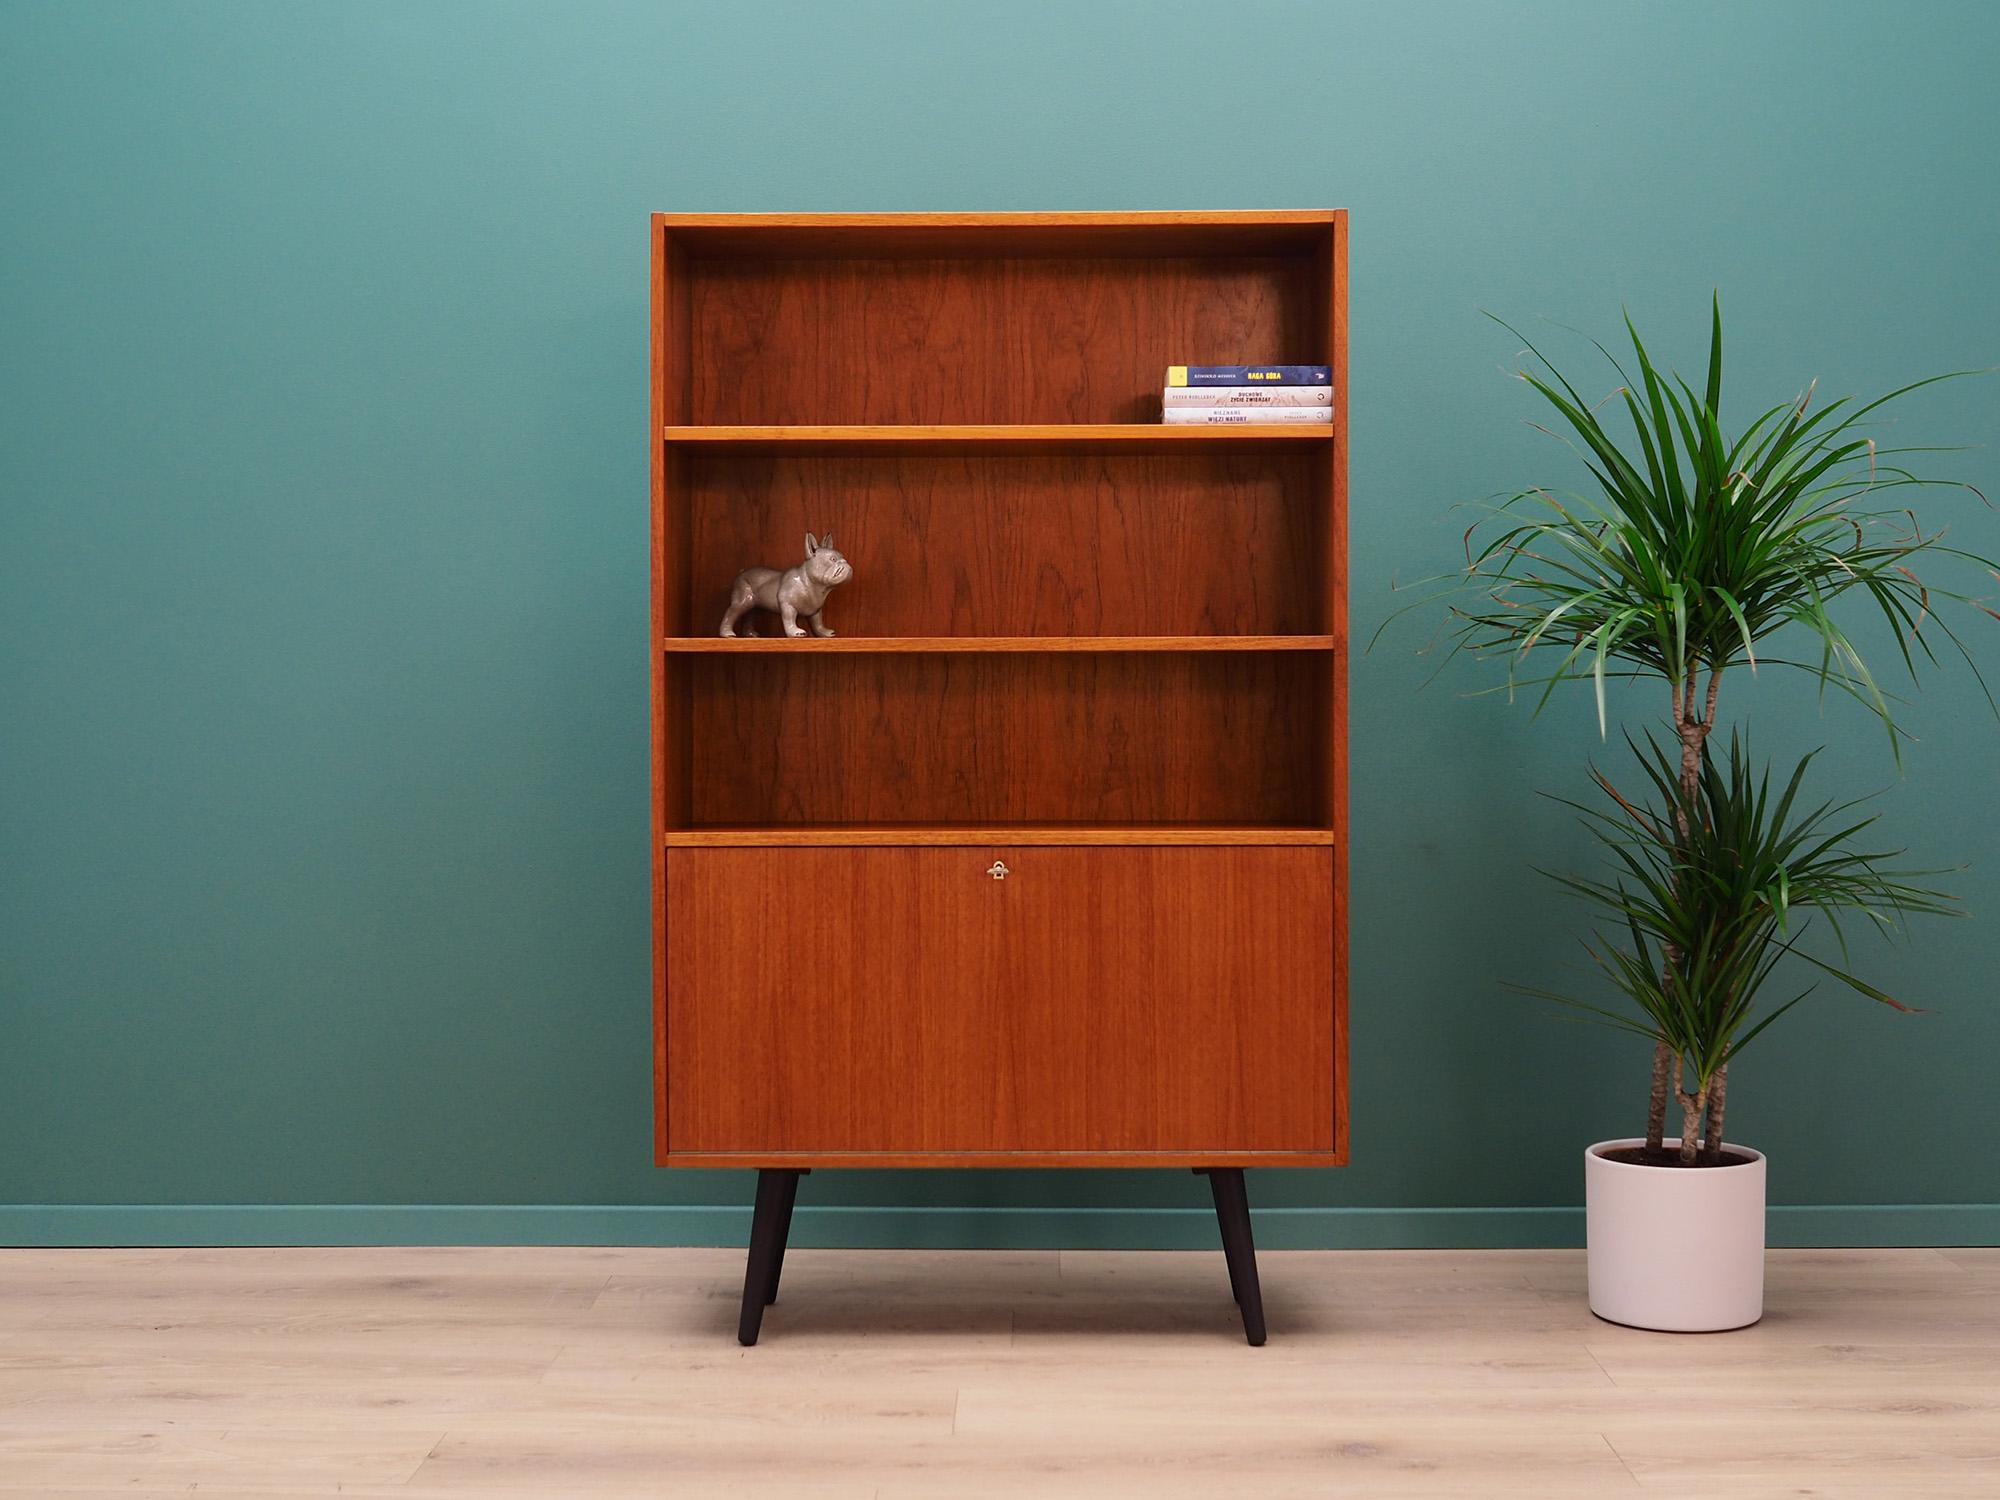 Fantastic bookcase from the 1960s-1970s. Scandinavian design, Minimalist form. Surface of the furniture finished with teak veneer. Bookcase has two shelves and a practical bar. Preserved in good condition (minor bruises and scratches) - directly for